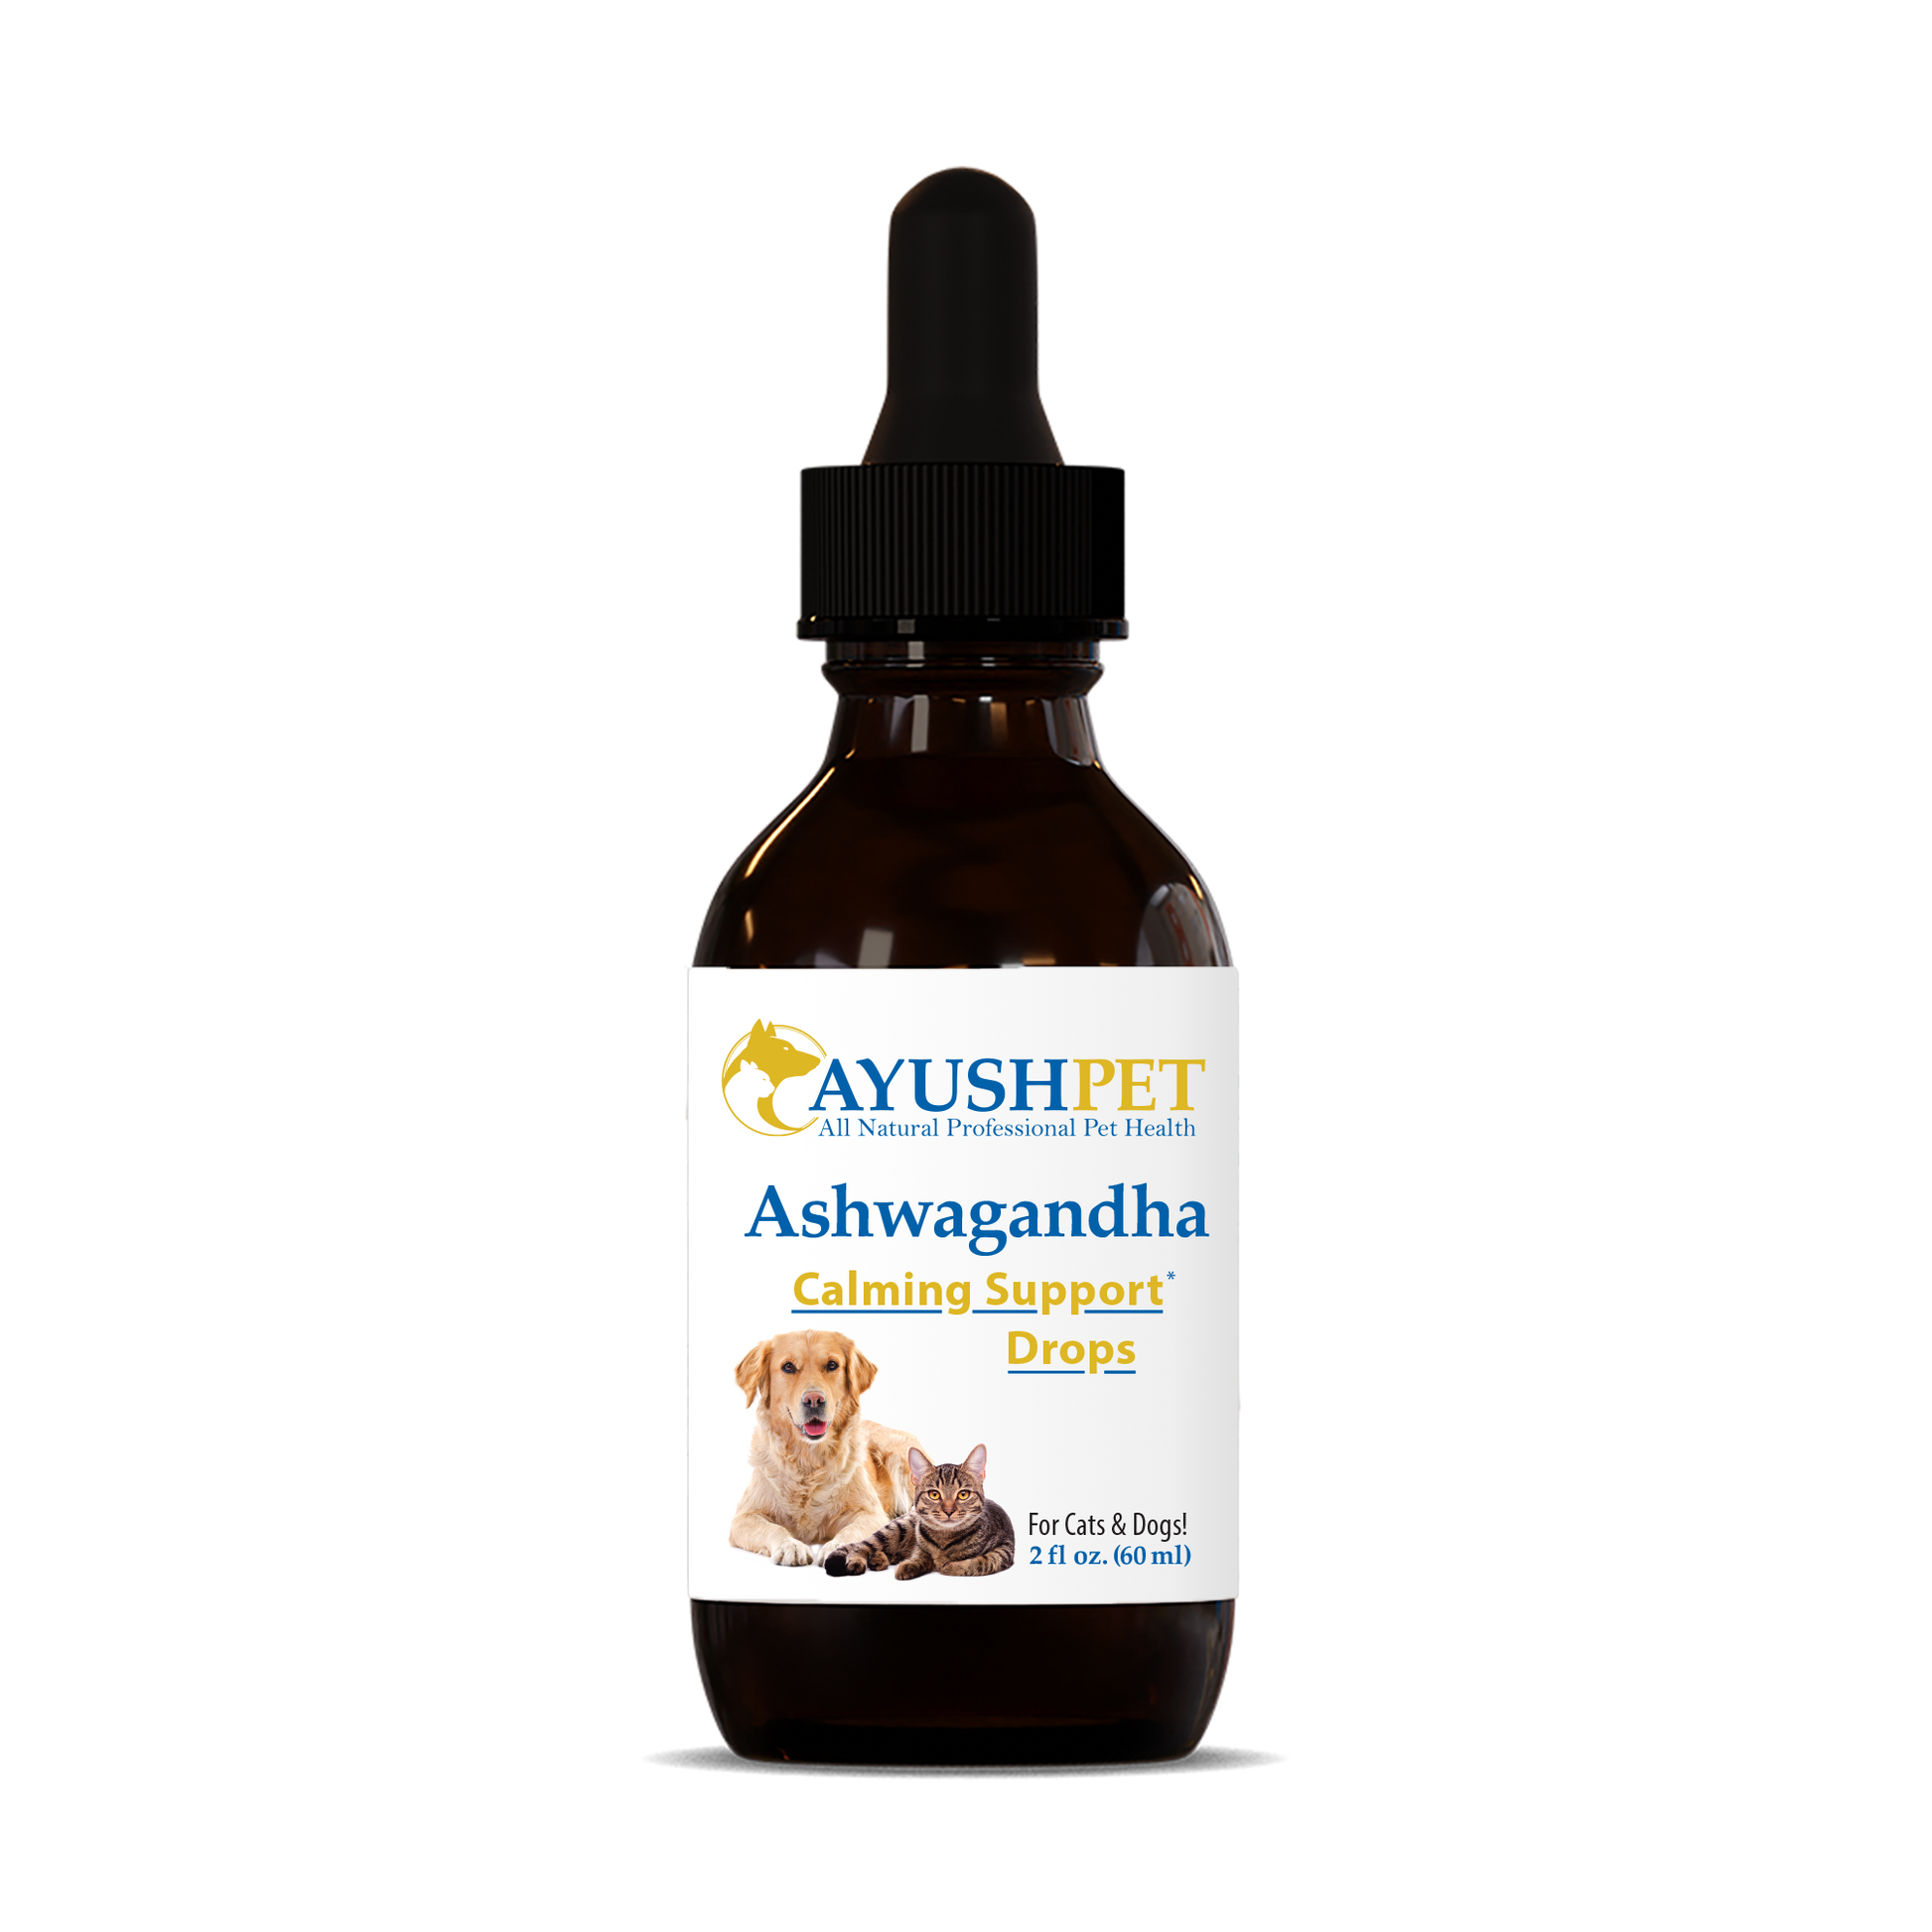 Pet Ashwagandha Drops are the complete all-natural solution for pet stress and cognitive health by ruved herbal supplements and ayush herbs